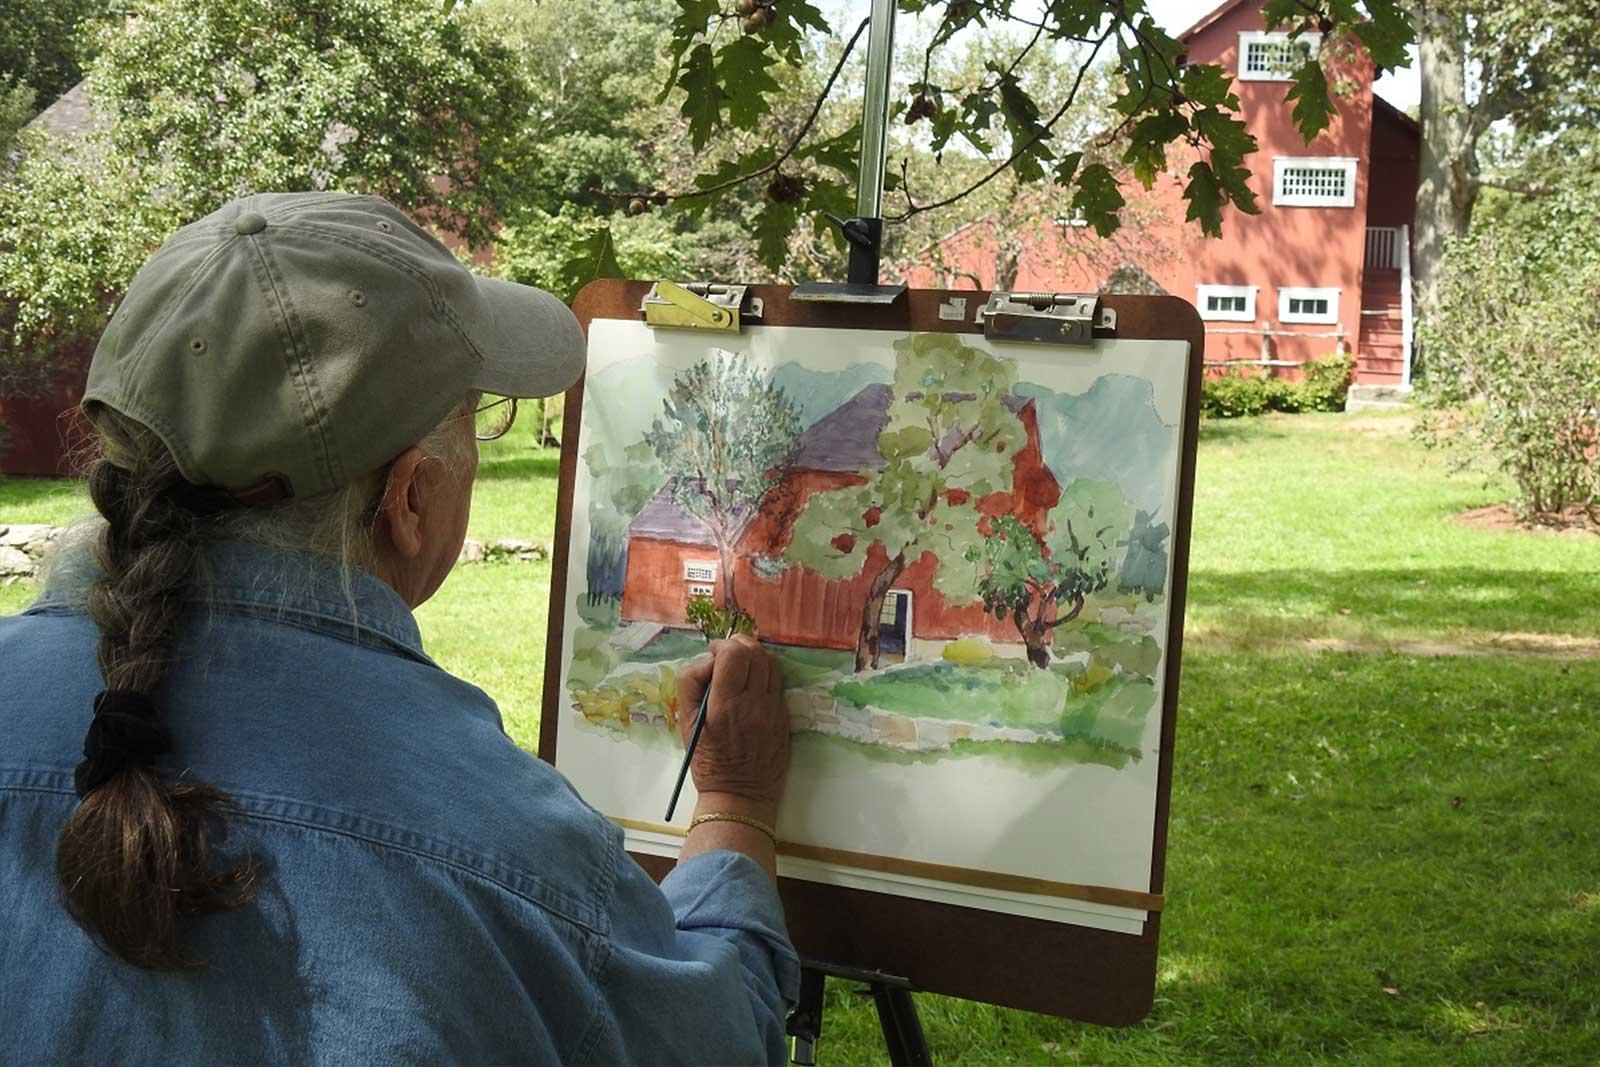 Bobbi Eike Mullen, a contemporary artist, paints at Weir Farm and instructs the park’s free art classes.  